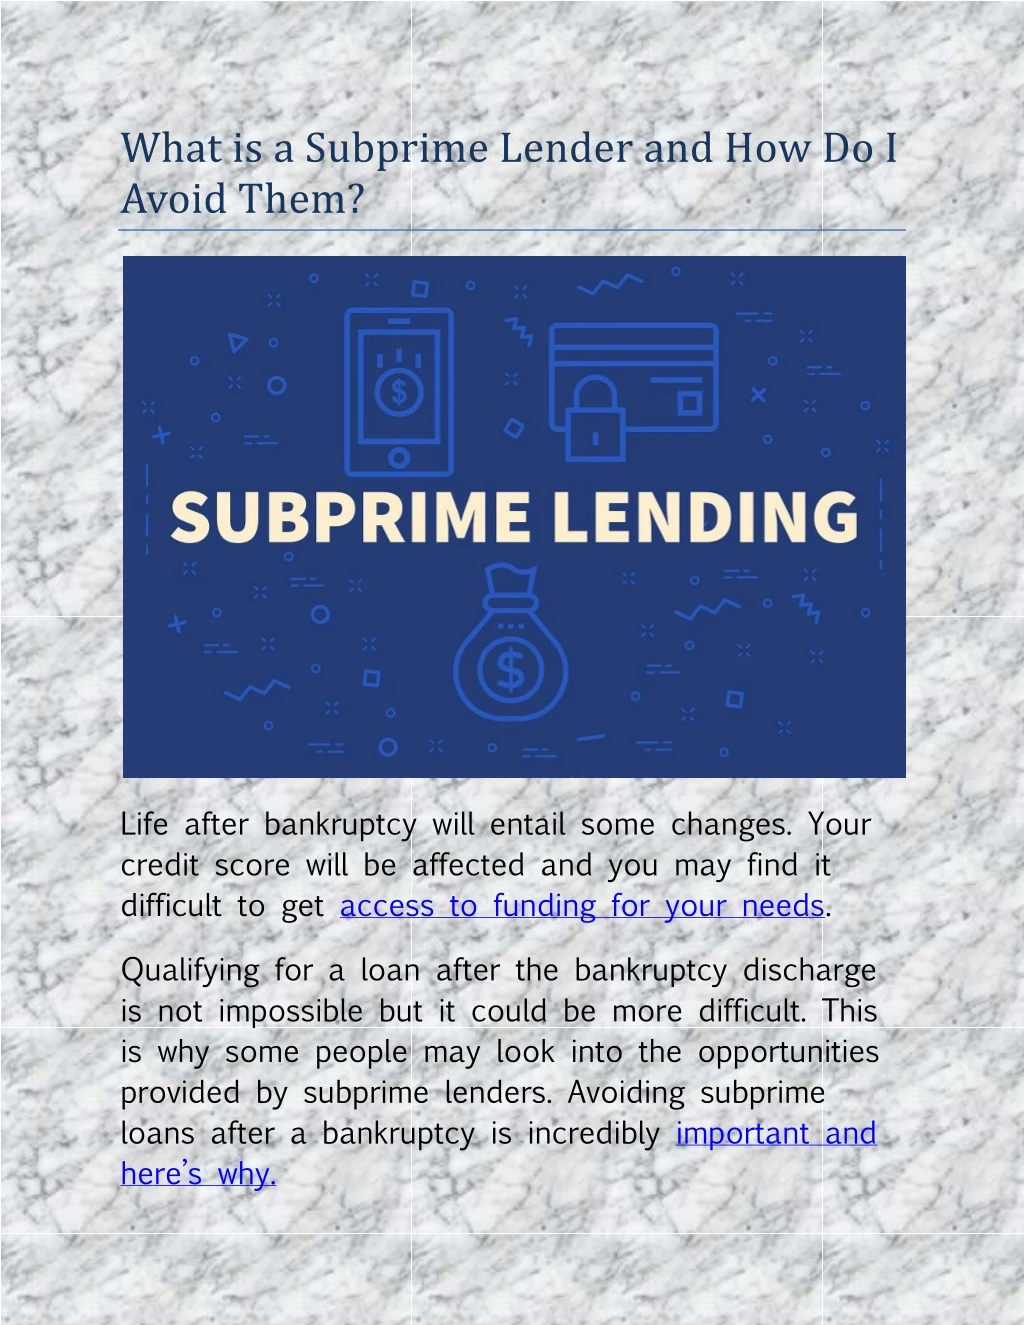 what is a subprime lender and how do i avoid them